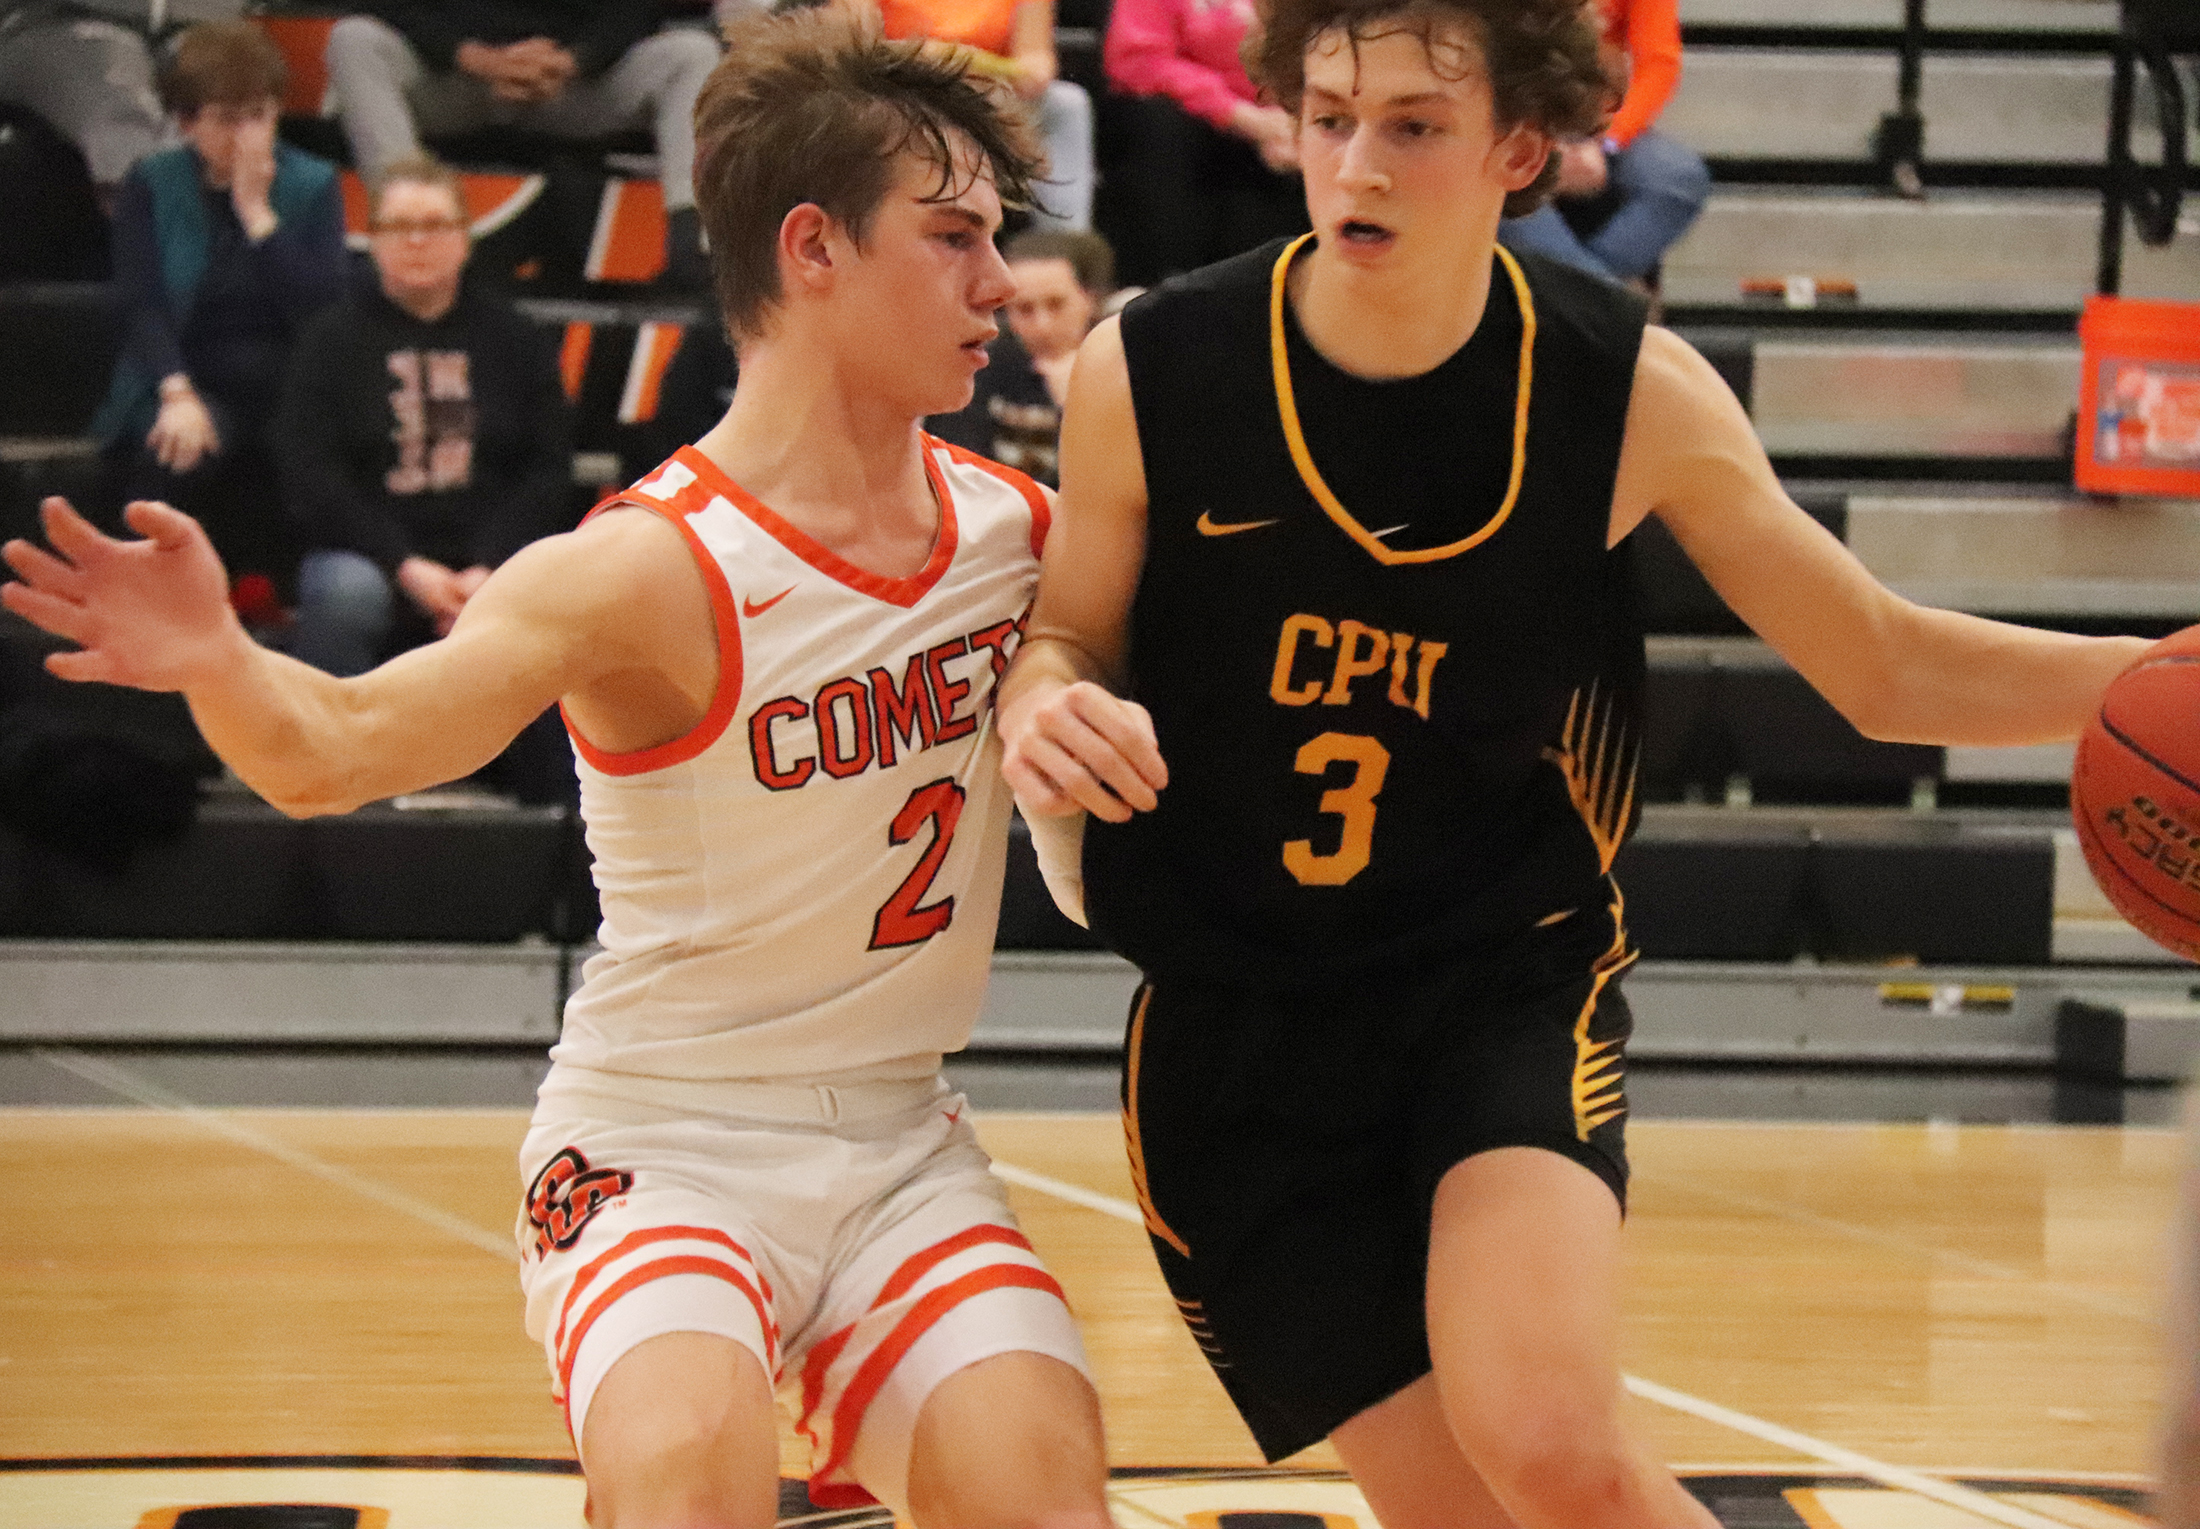 Comets advance past Pointers 56-45, to face HDC Bulldogs in substate semifinals on Thursday